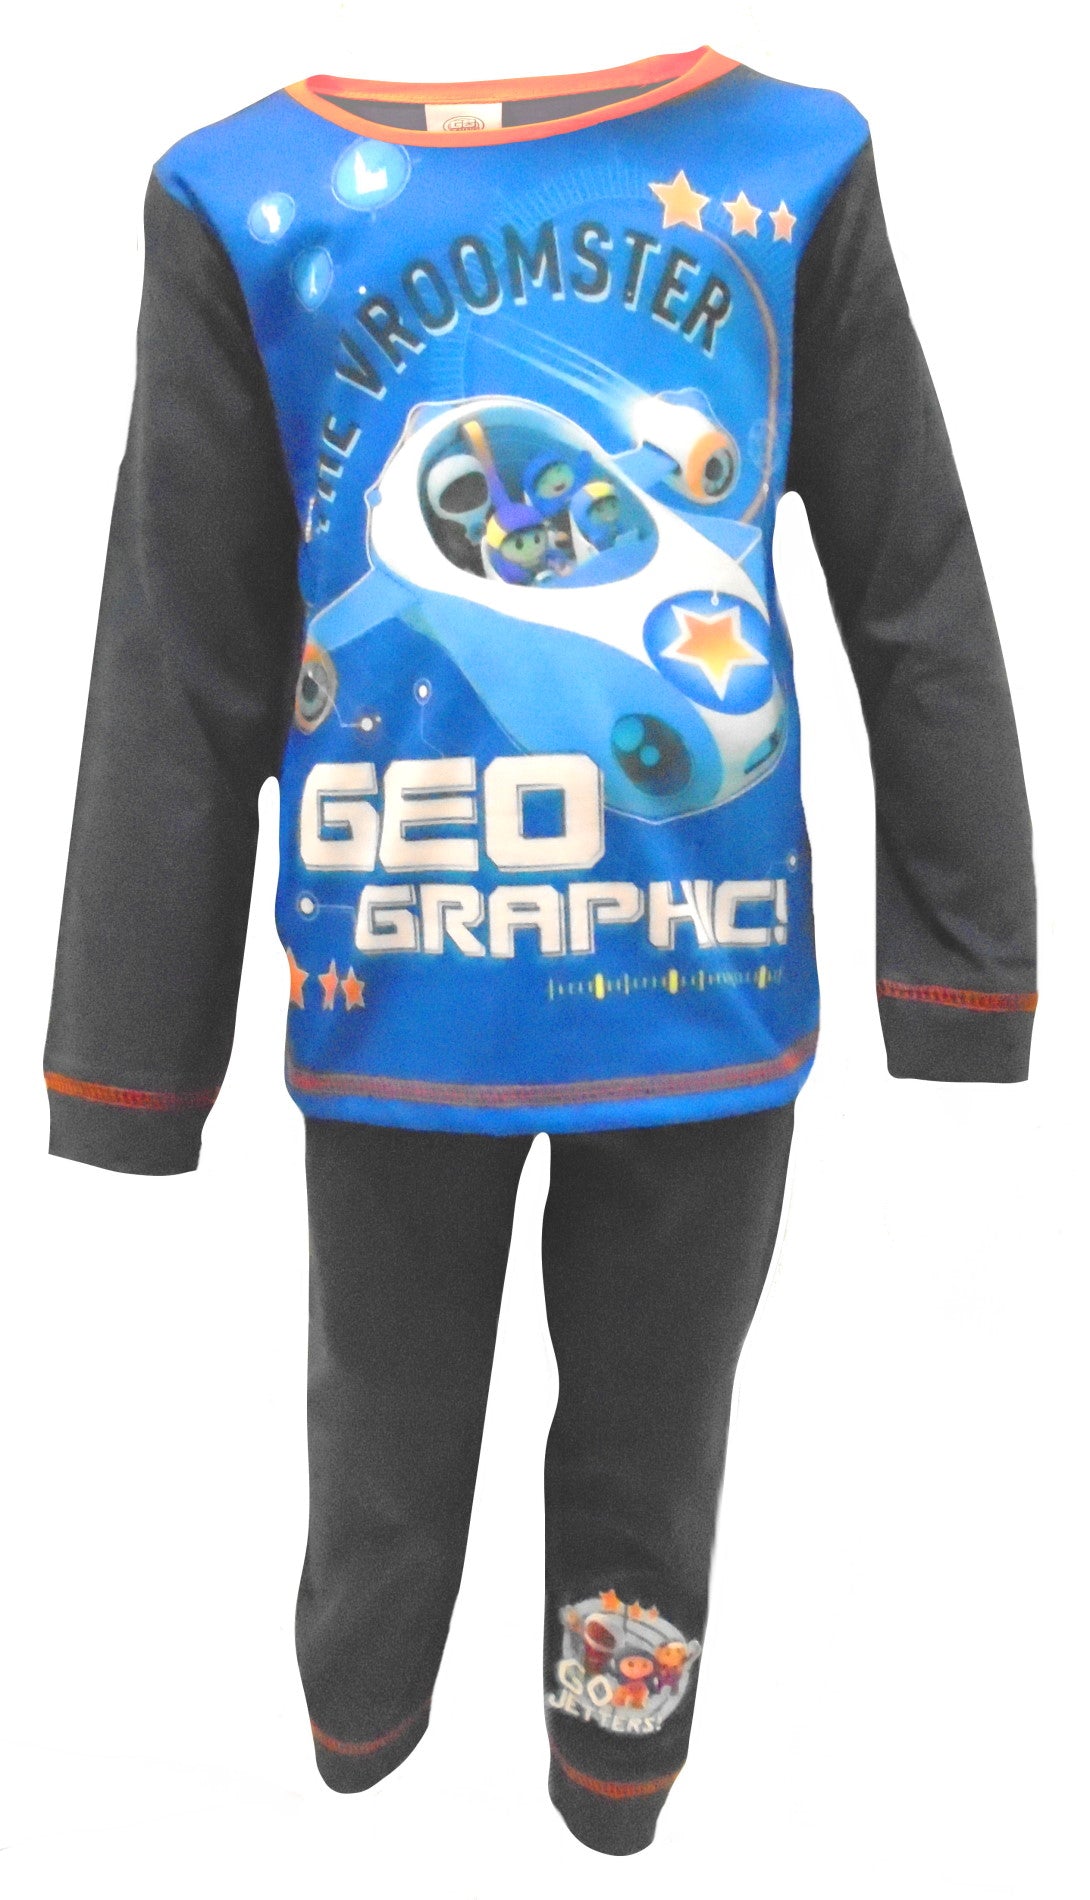 Go Jetters "The Vroomster" Boys Pyjamas 18-24 Months